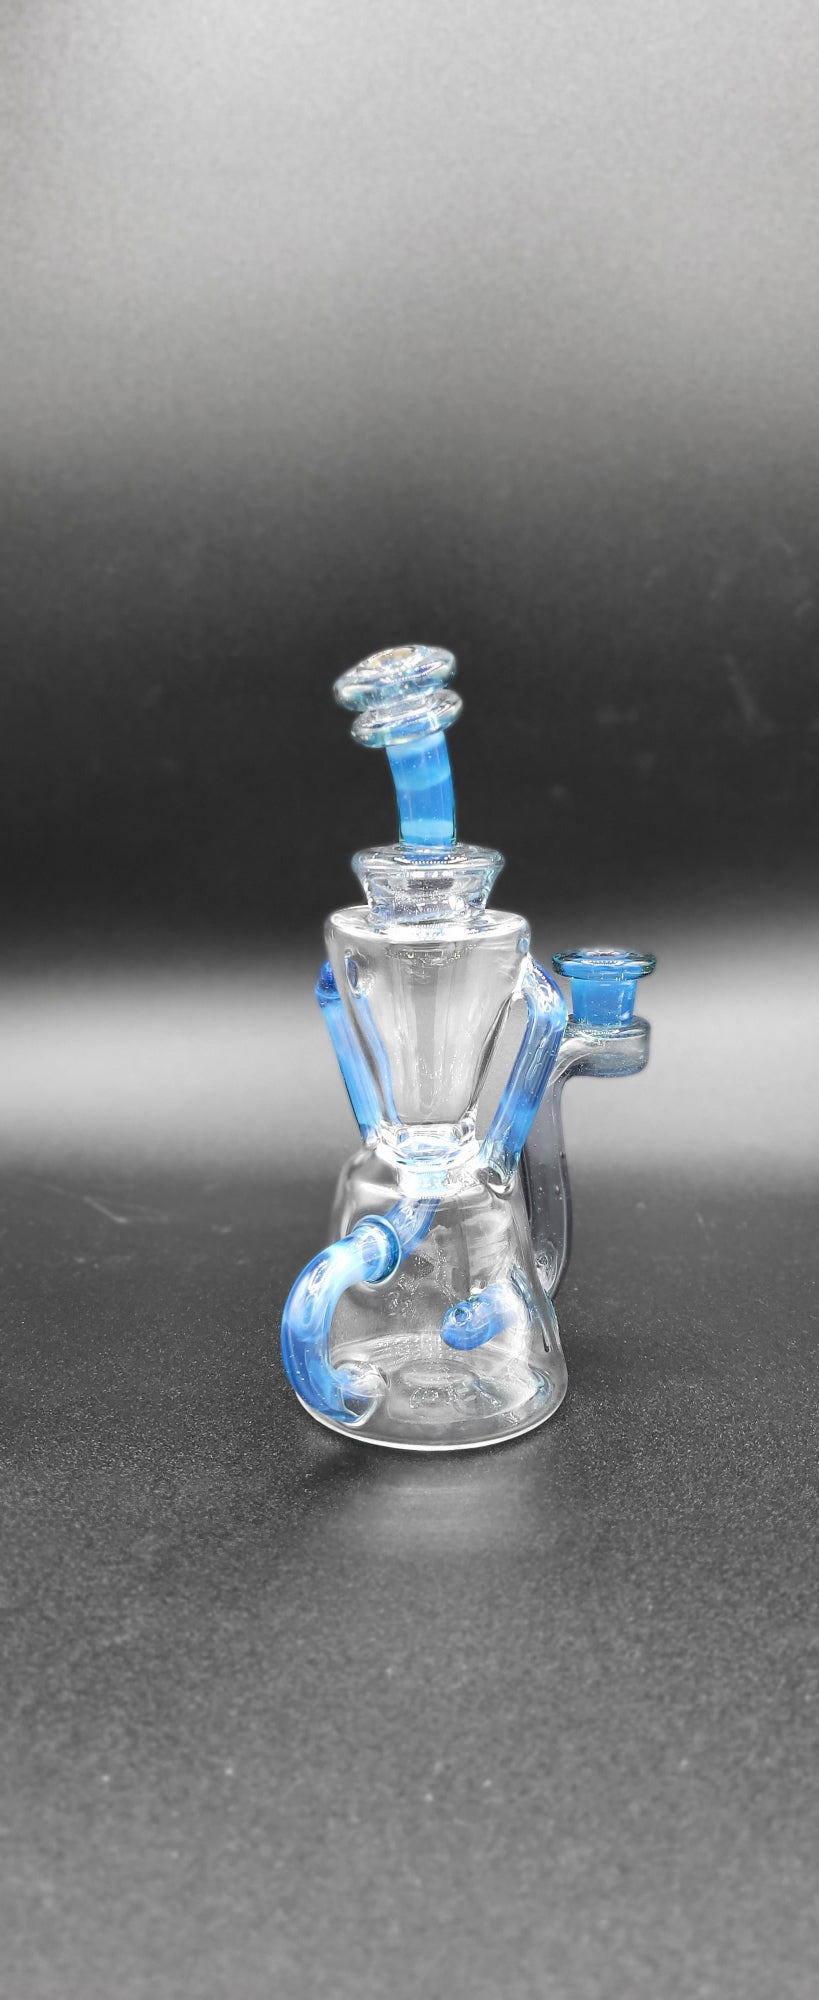 Heart and mind recycler